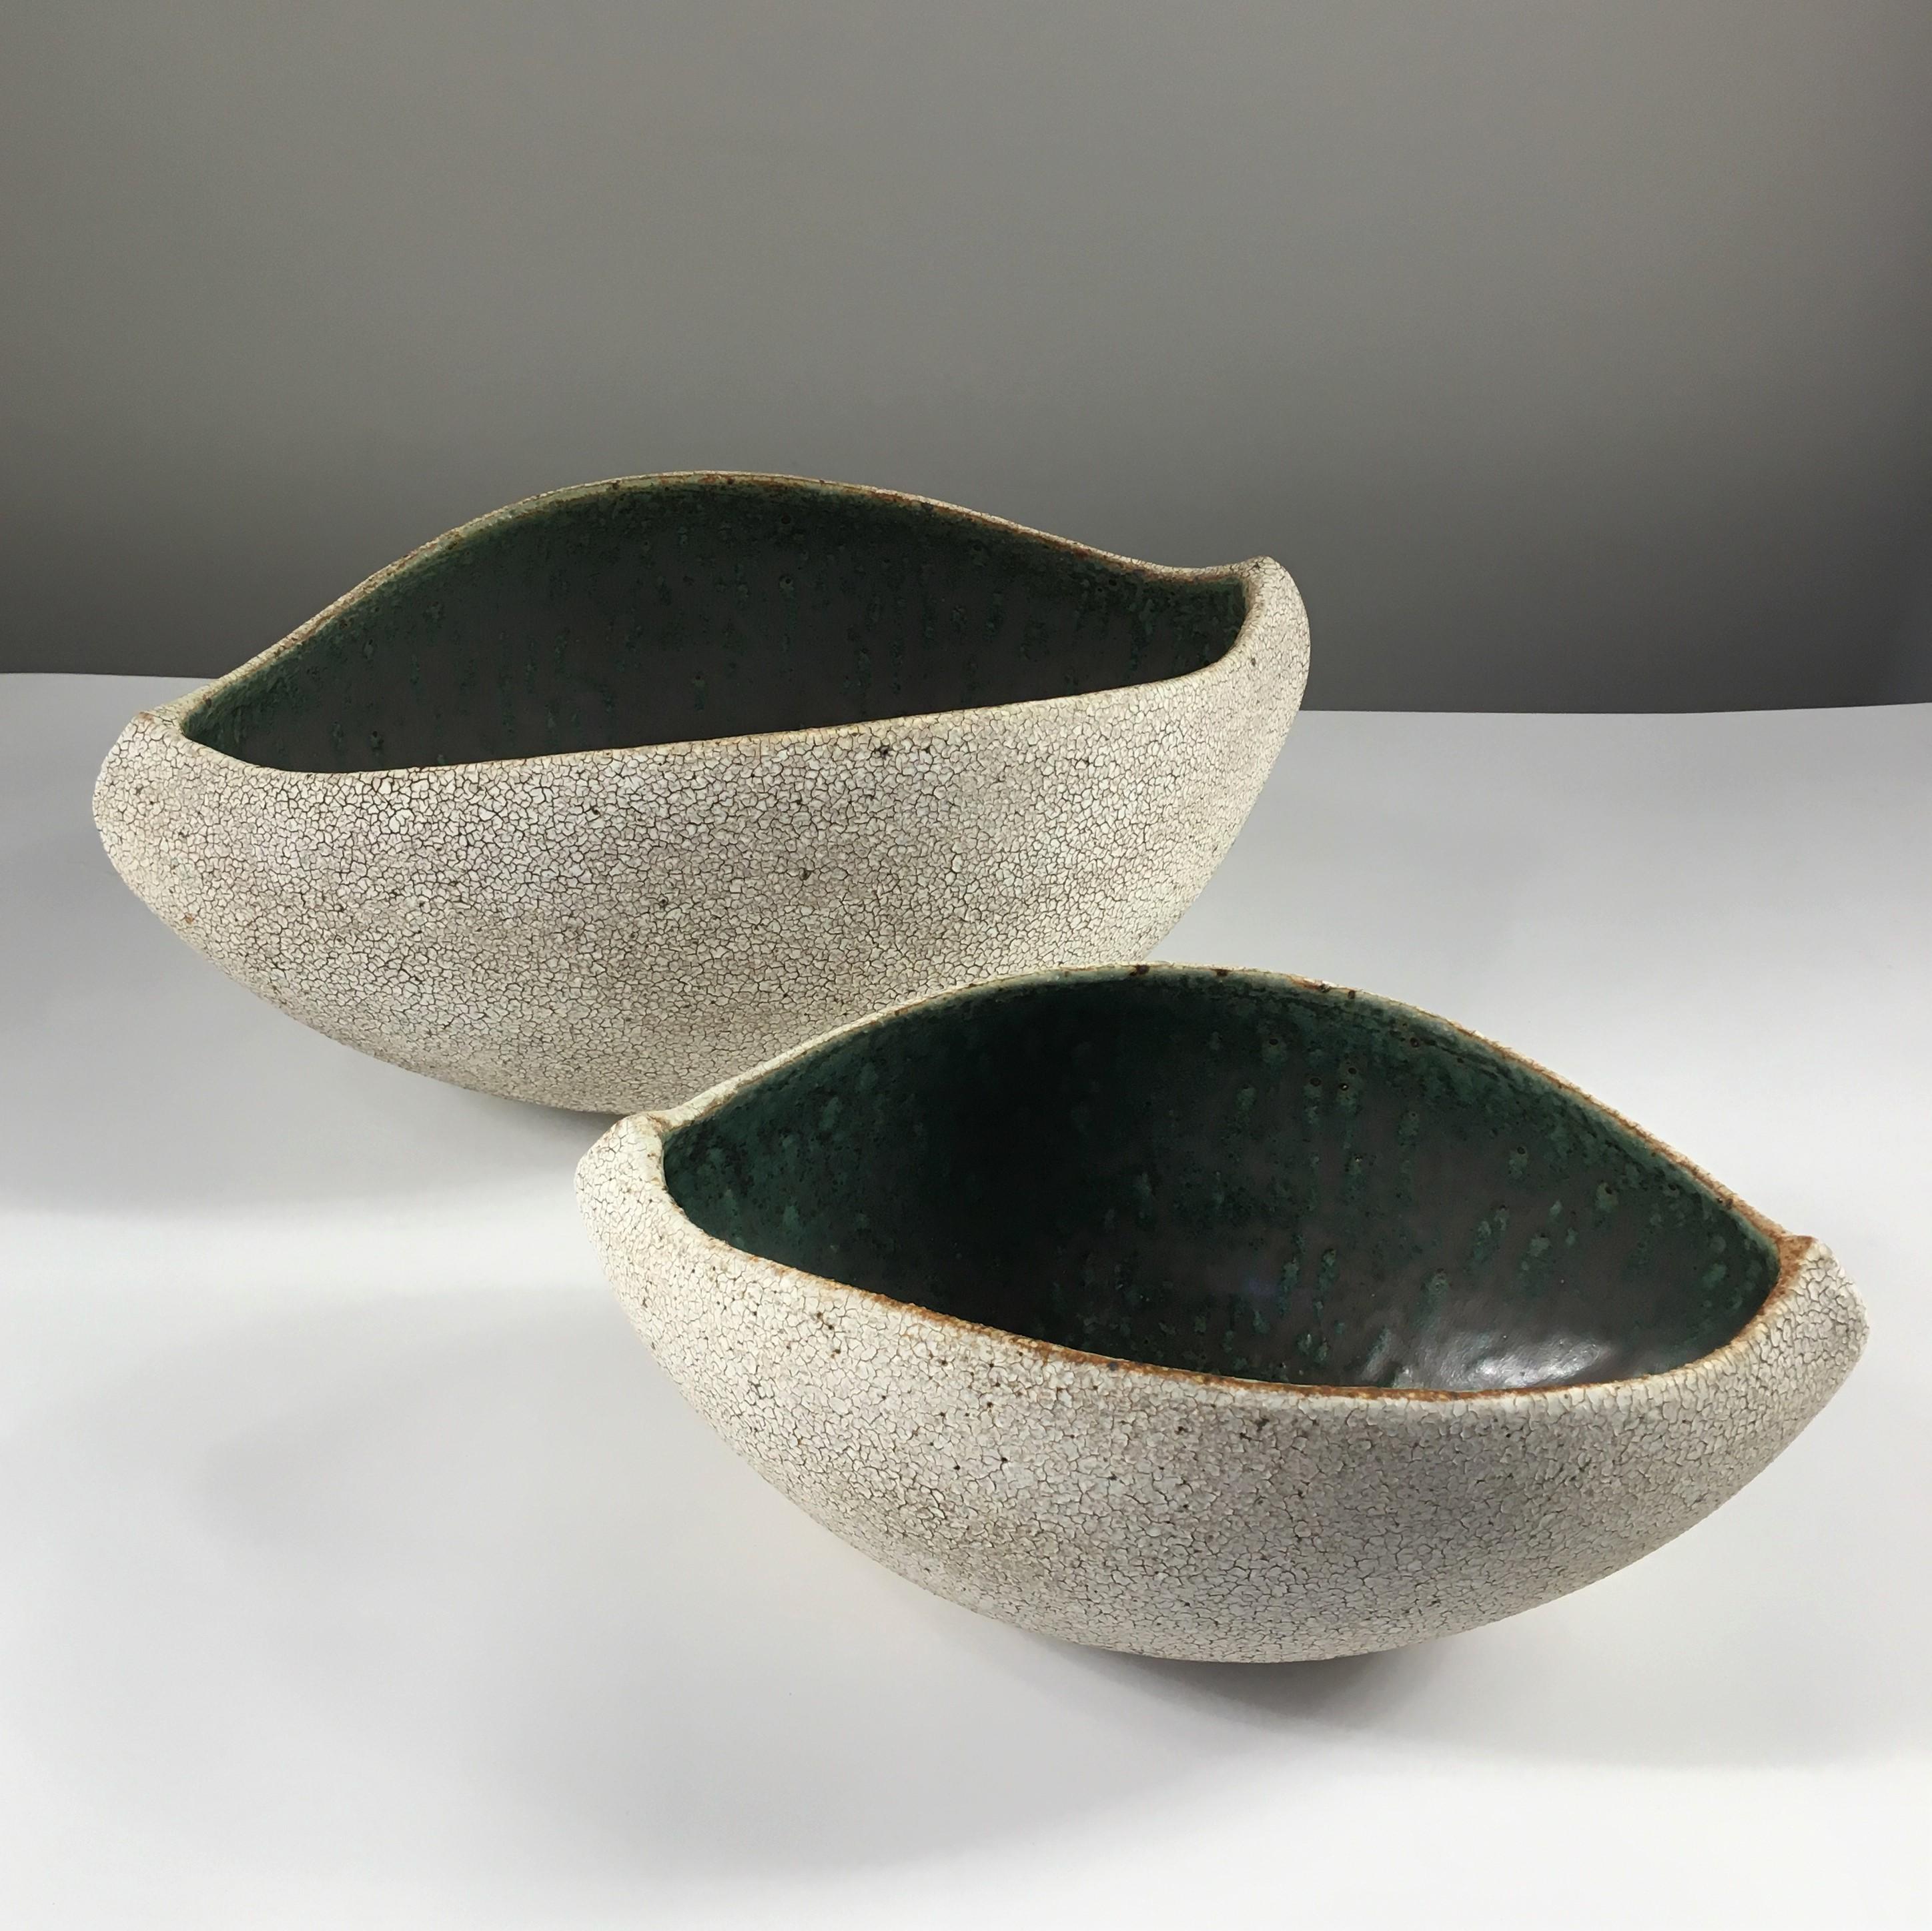 Set of 2 Boat Shaped Pottery Bowls with Dark Inner Glaze by Yumiko Kuga. Dimensions: W 12.5